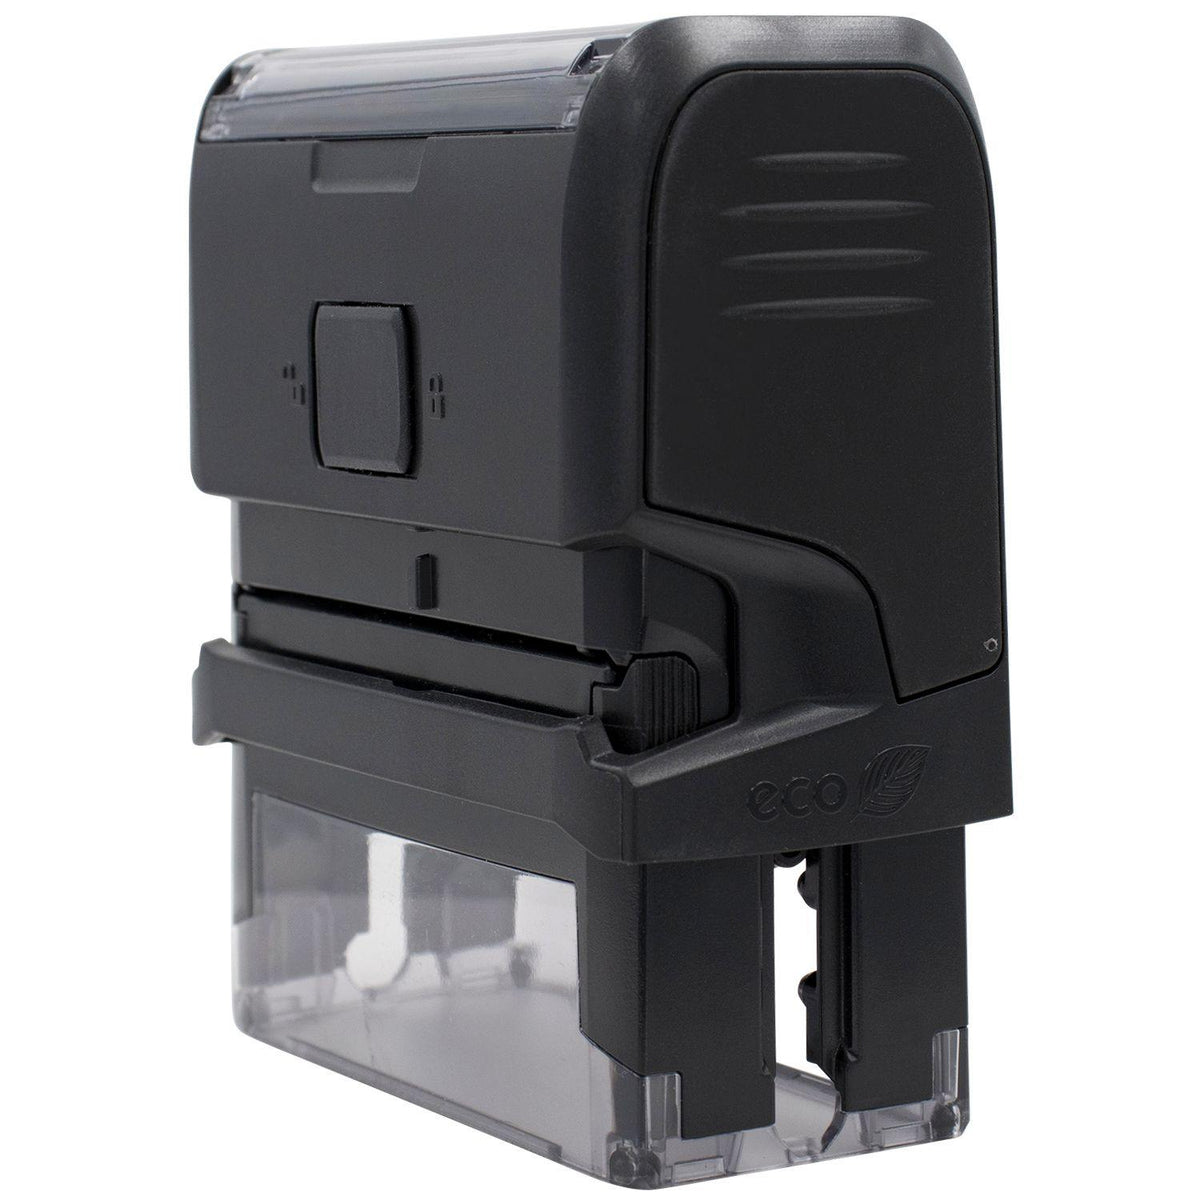 Large Self-Inking This belongs to ... Stamp - Engineer Seal Stamps - Brand_Trodat, Impression Size_Large, Stamp Type_Self-Inking Stamp, Type of Use_General, Type of Use_Teacher